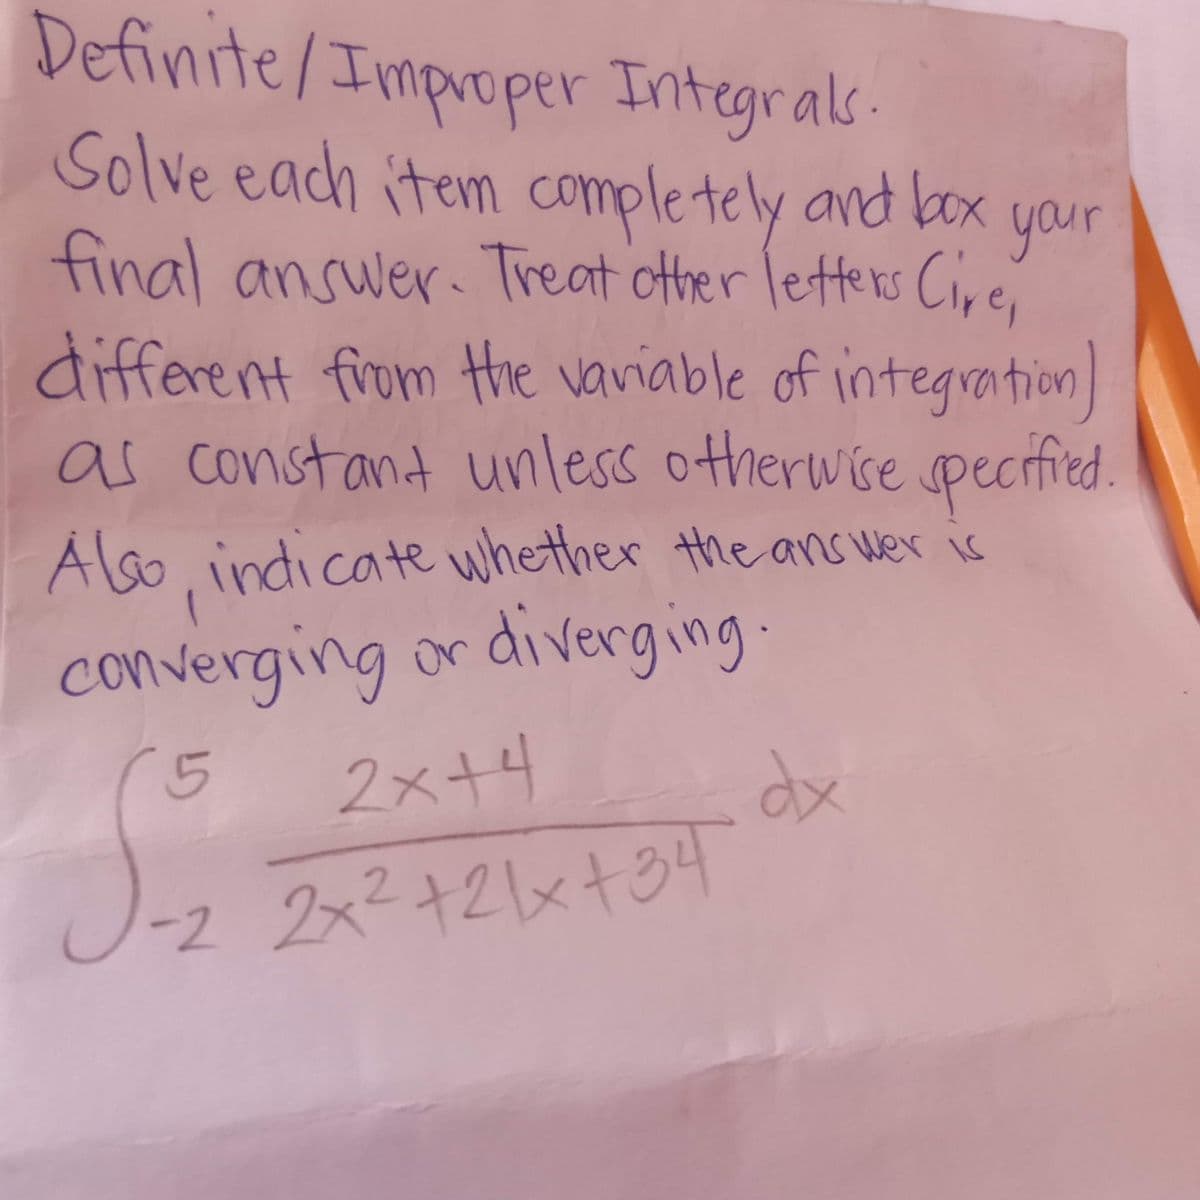 Definite/Improper Integras
als
Solve each item completely and box
your
final answer Cire,
Treat other lette ns
different from the vaviable of integration
as otherwise pecified.
constant unless
Alsoindicate whether the ans wer is
converging or diverging.
(5
2x+リ
dx
-2 2x2+21x+3円
